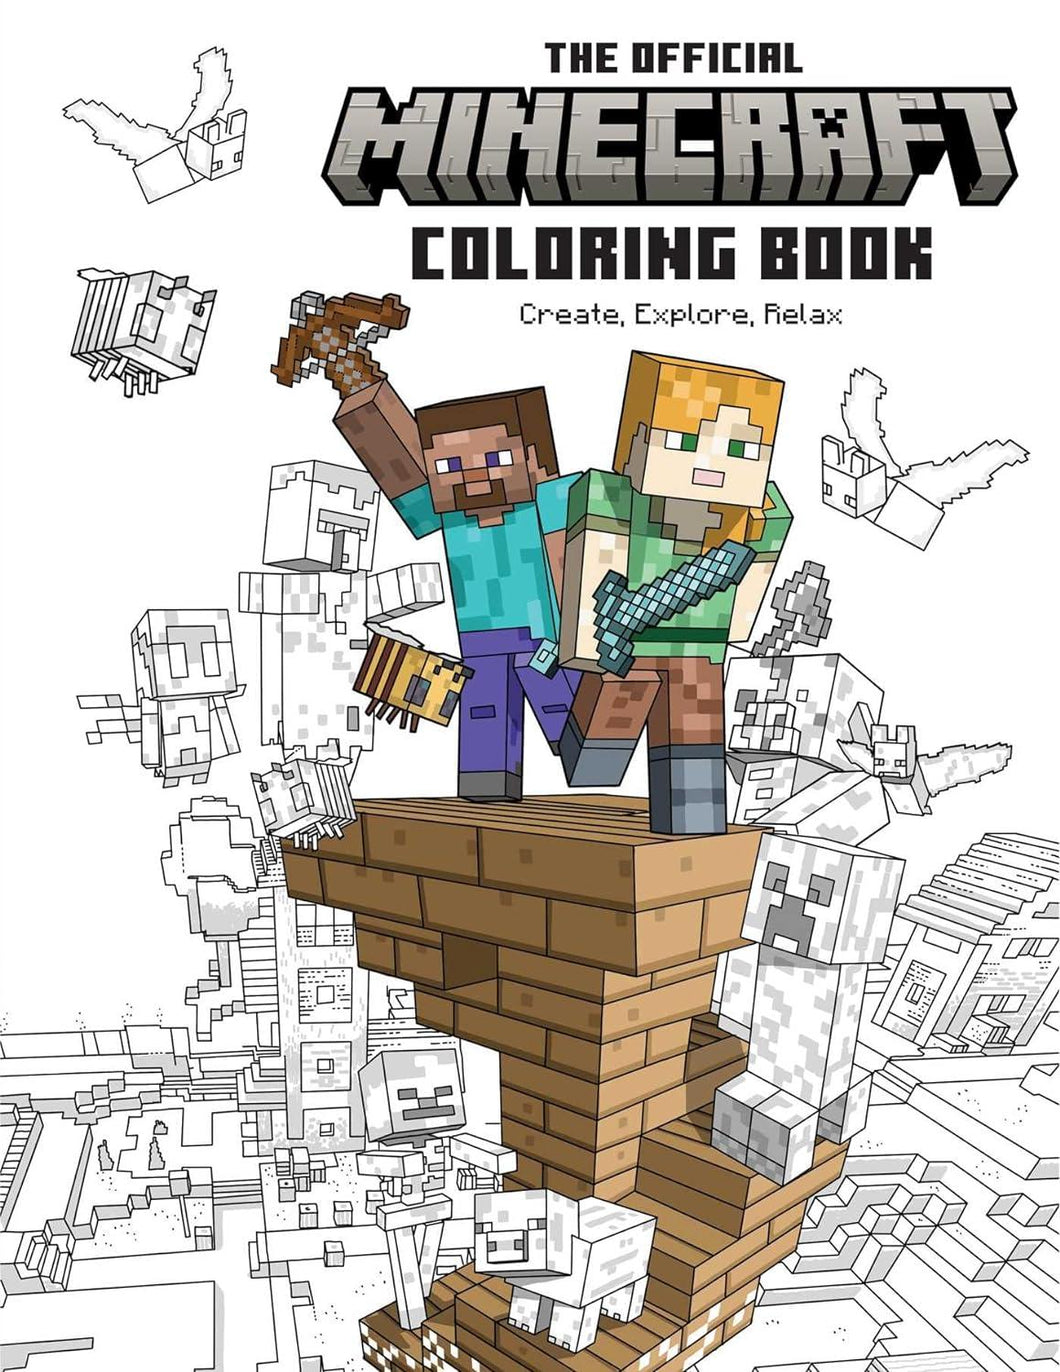 Official Minecraft Coloring Book